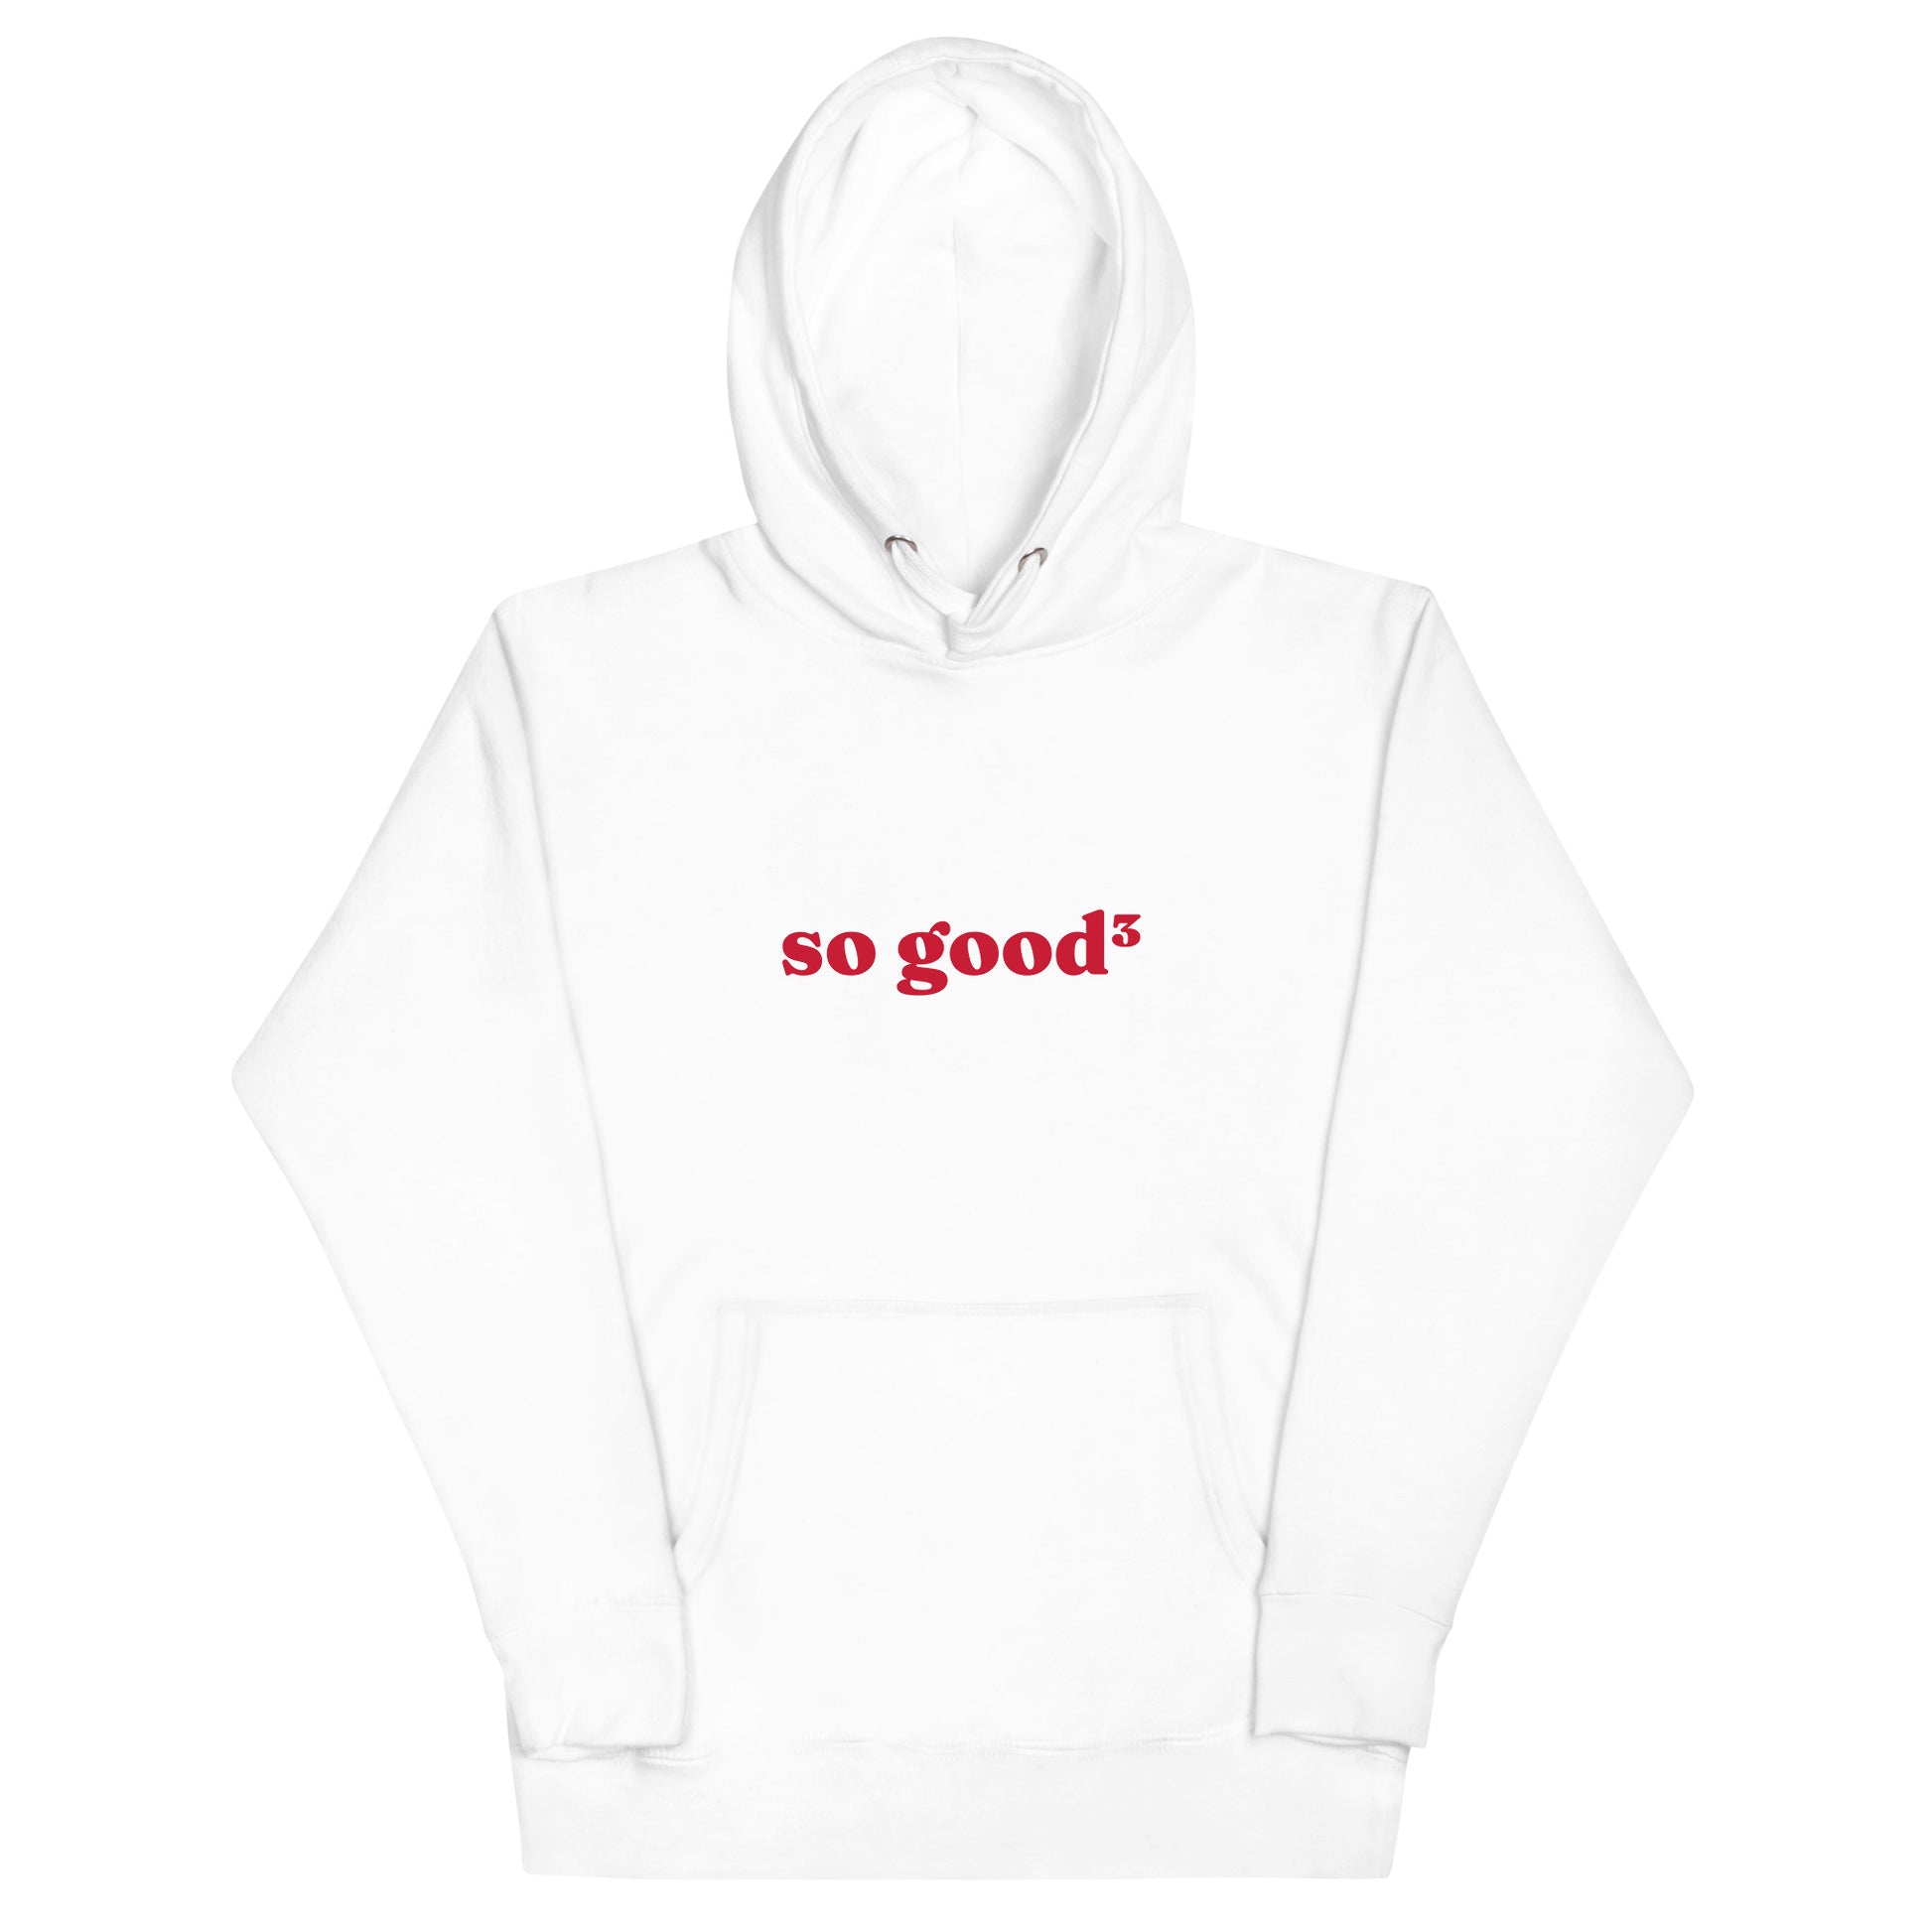 white hoodie that says "so good cubed" in red lettering